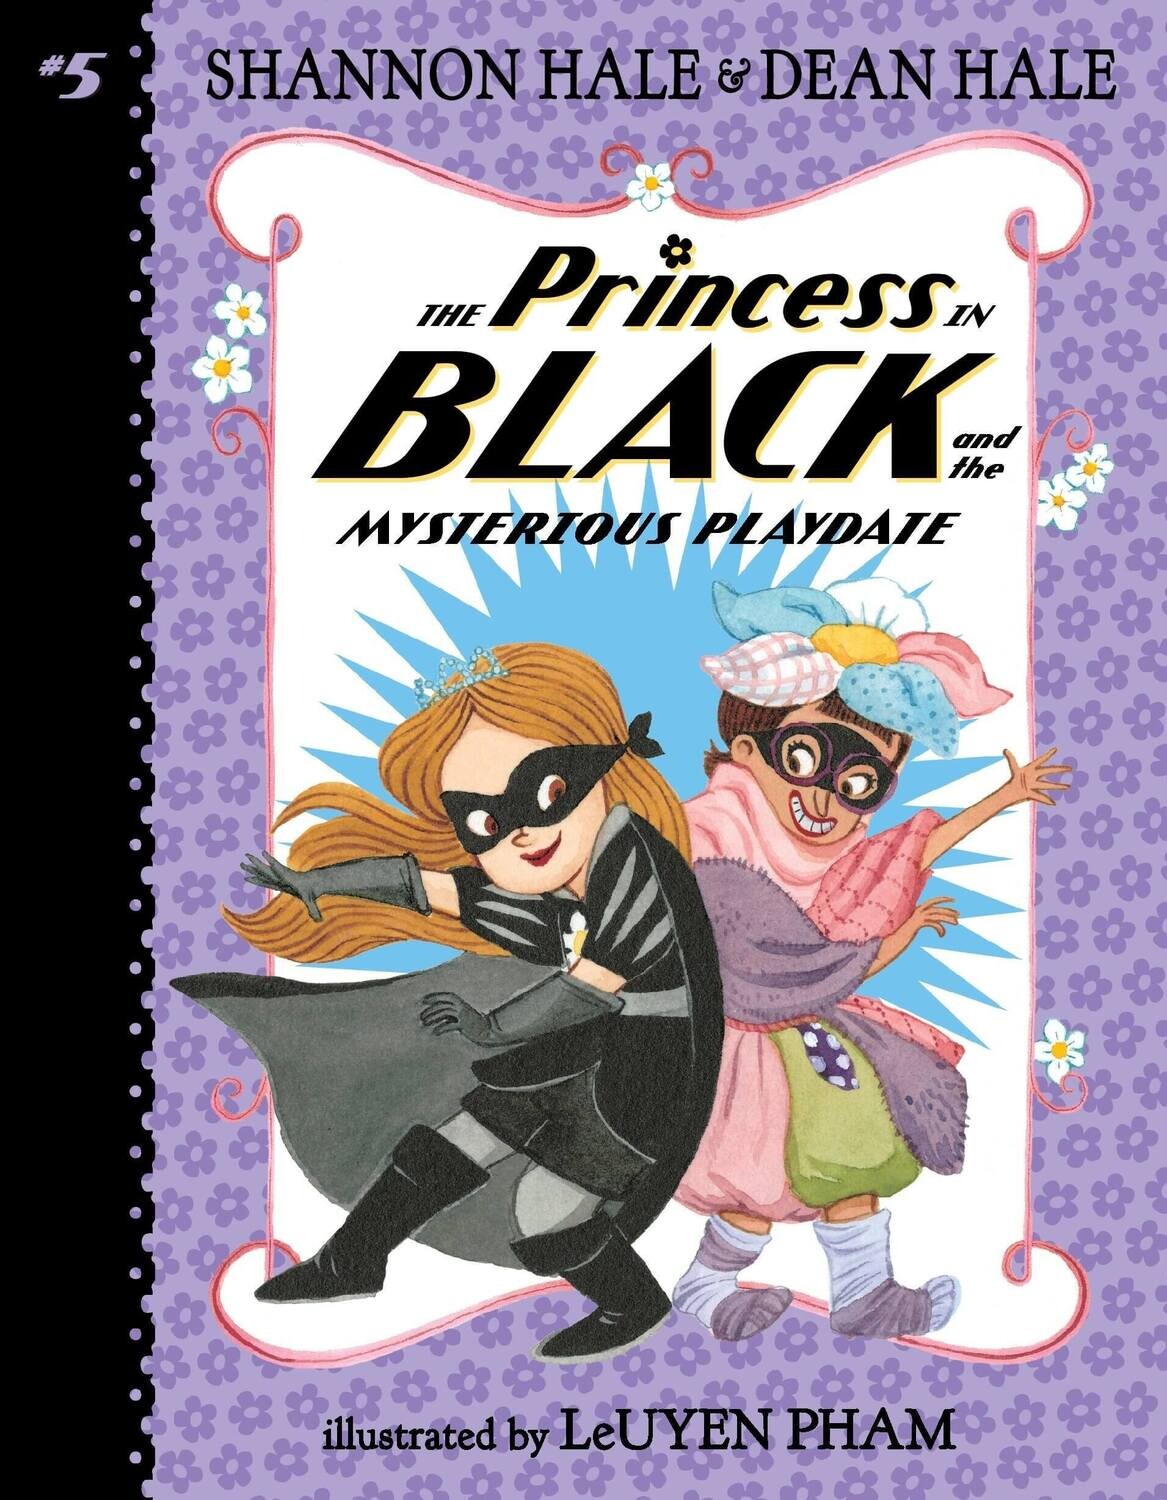 The Princess In Black And The Mysterious Playdate #5 - Hale